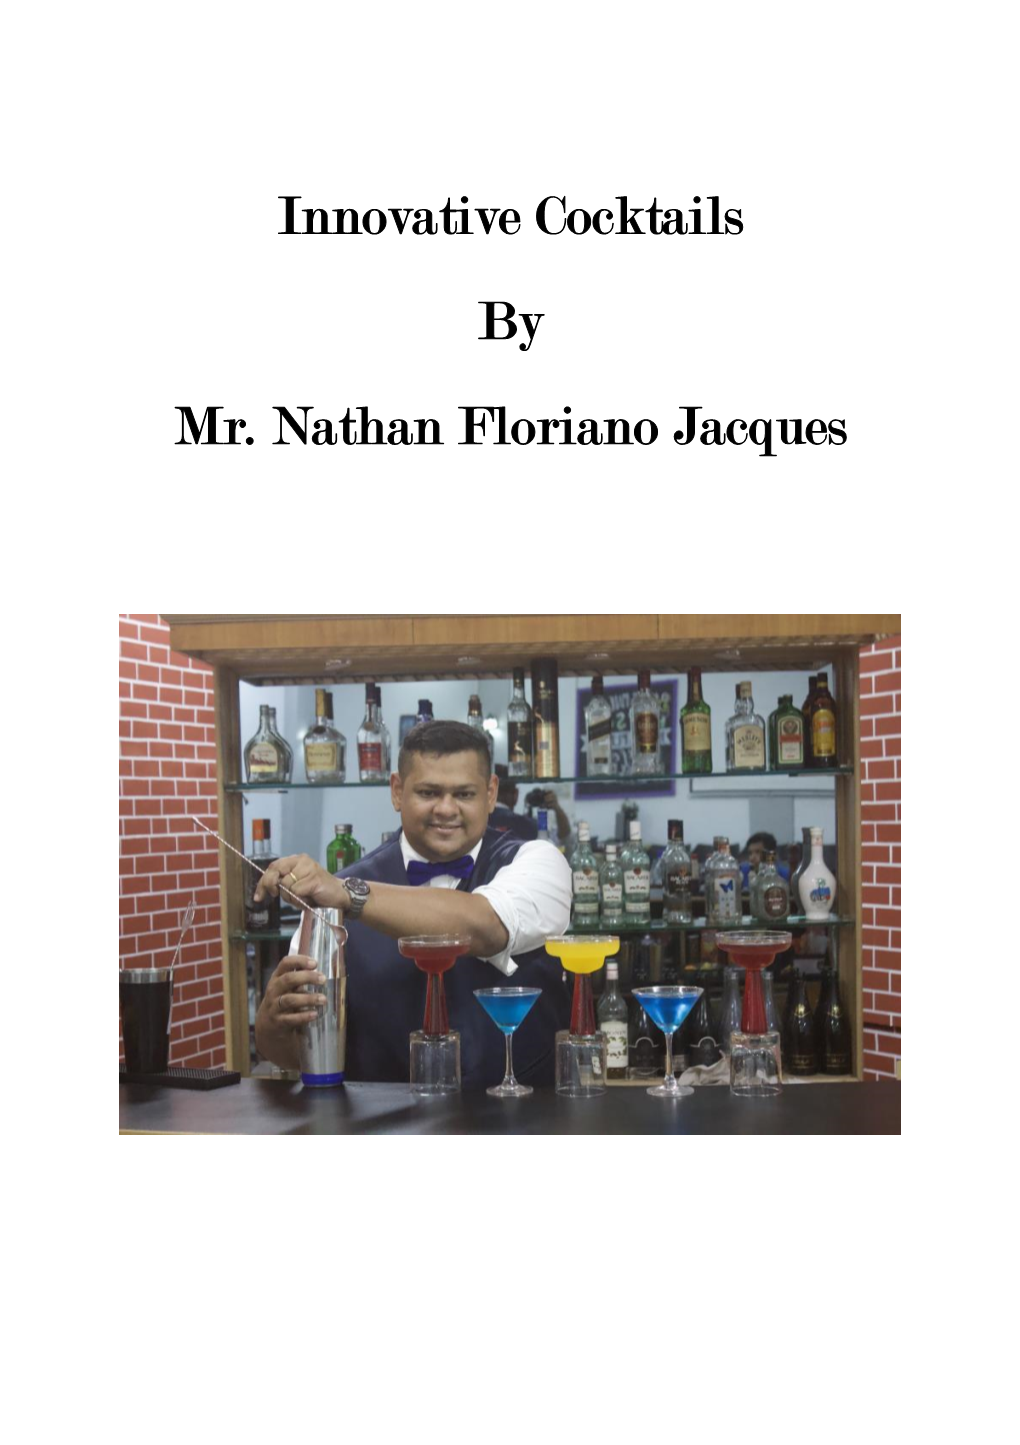 Innovative Cocktails by Mr. Nathan Floriano Jacques